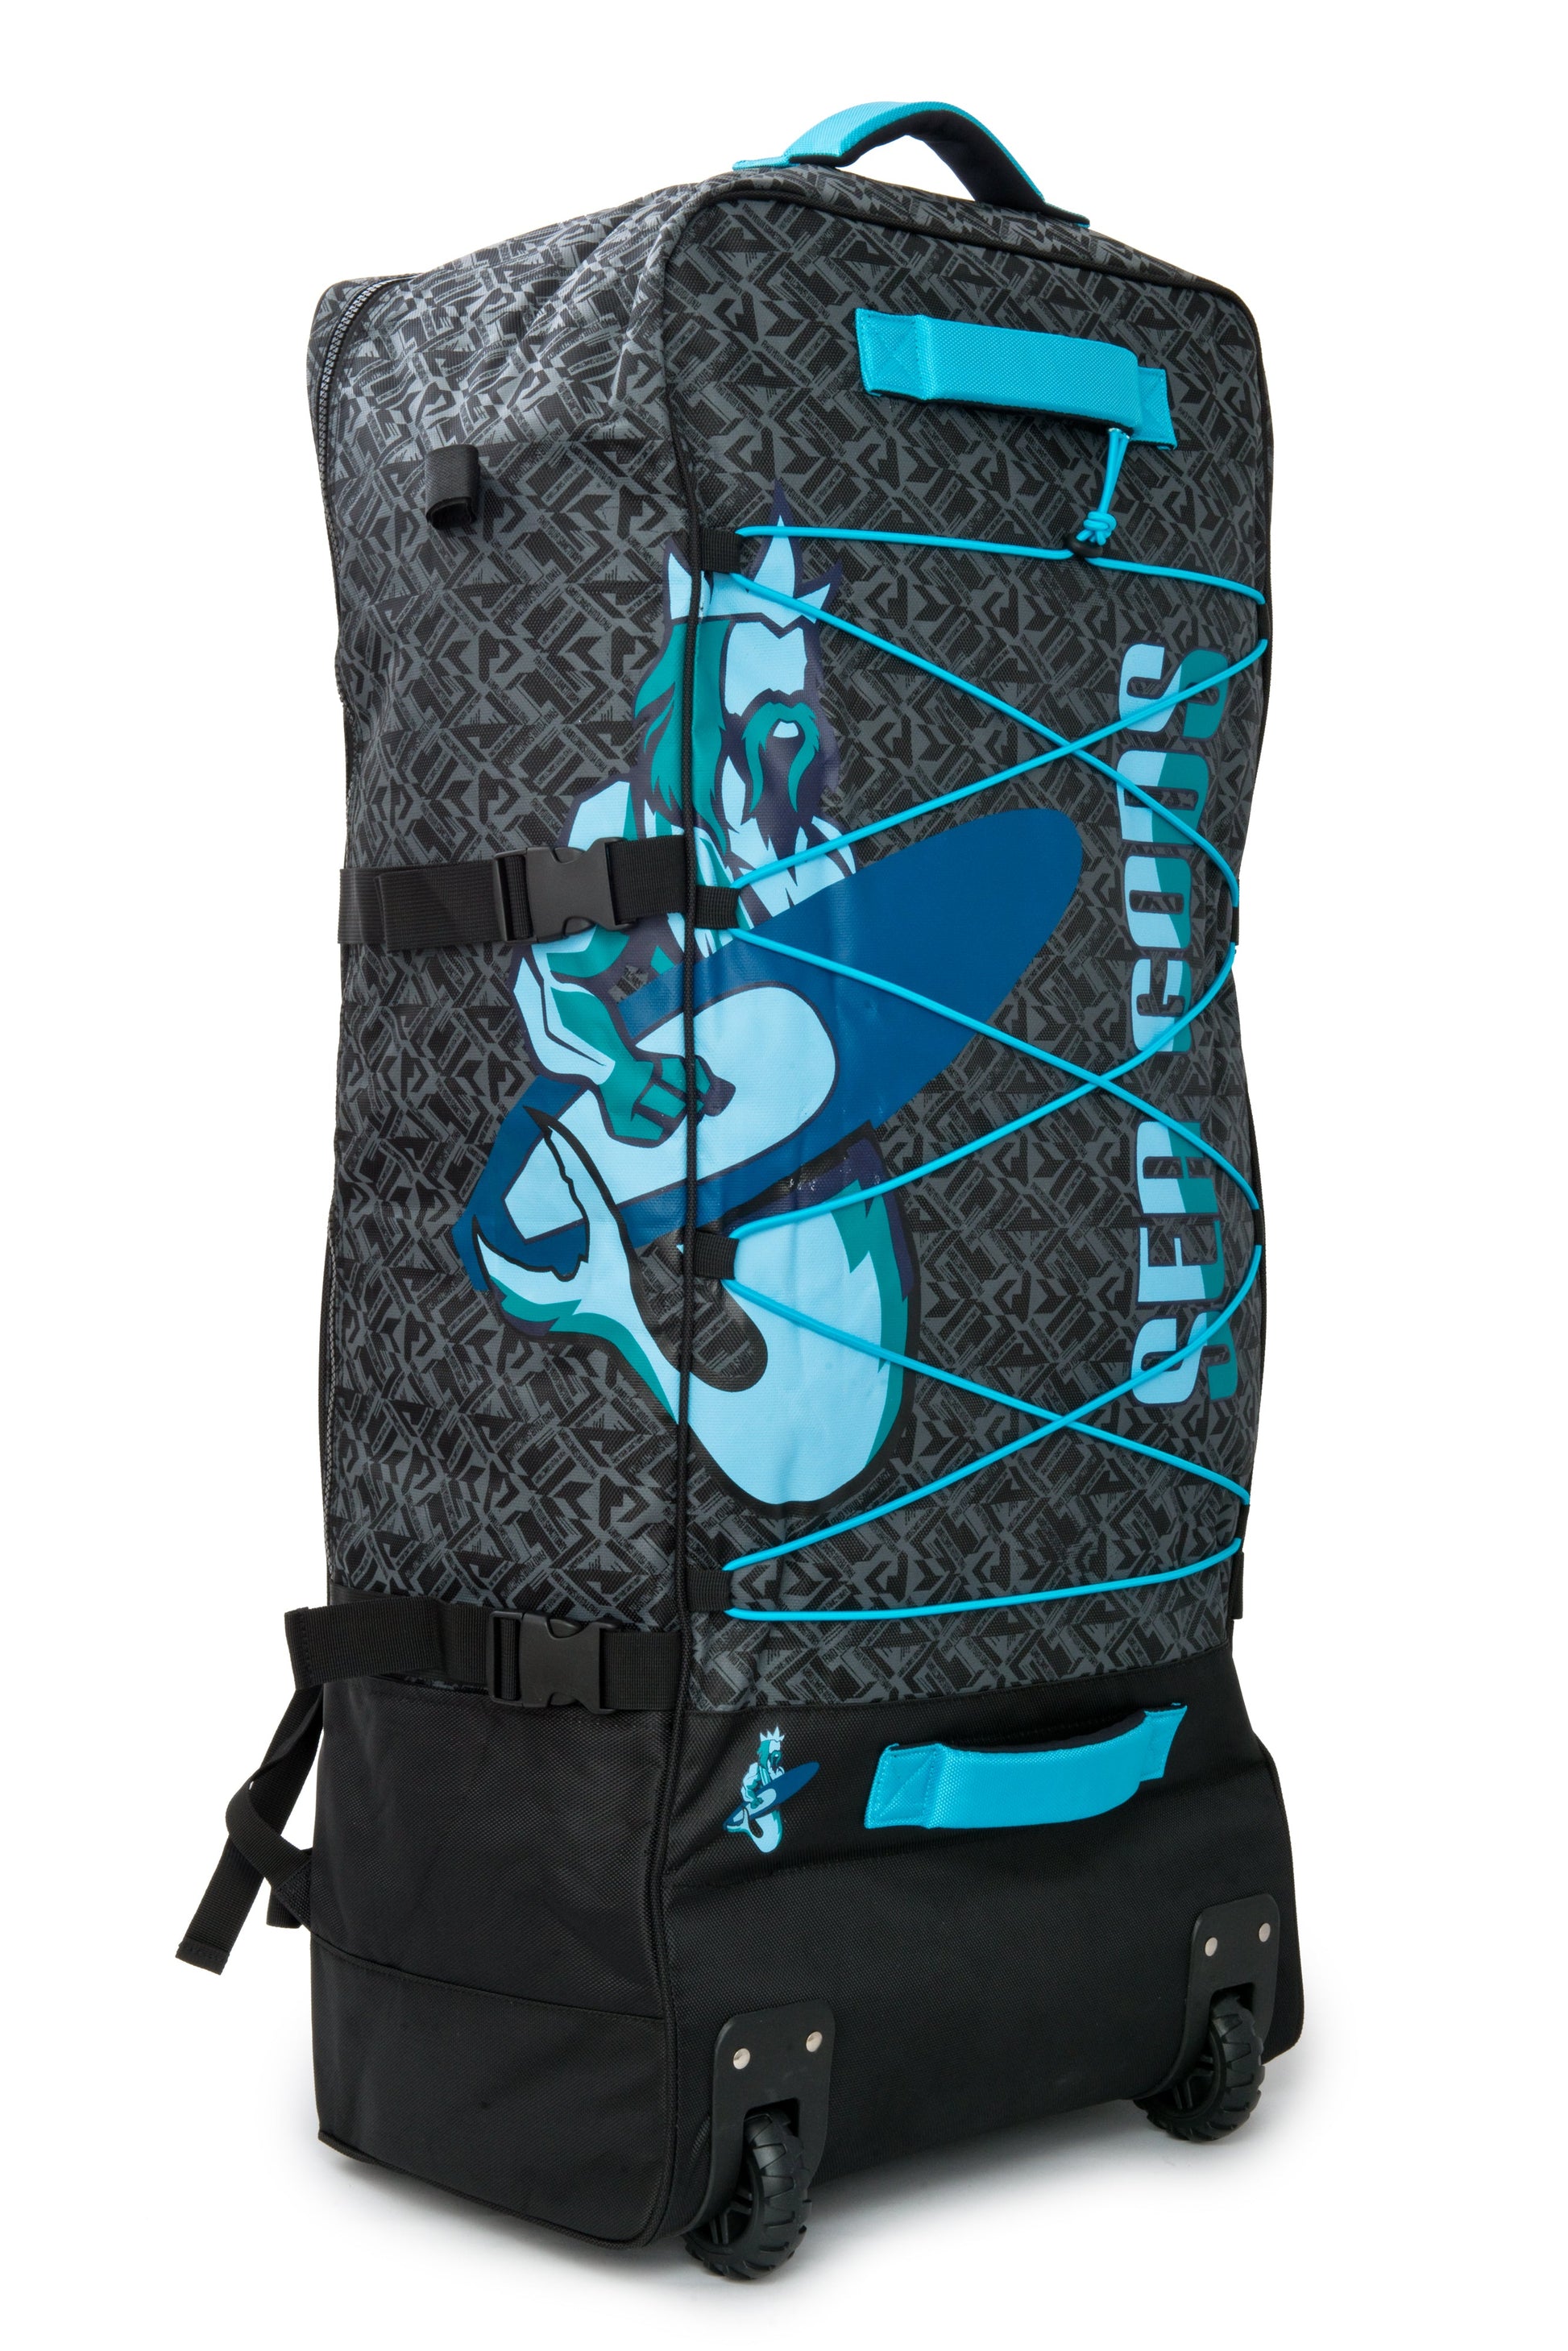 Seagods Stand Up Paddleboards Wheeled carry bag side